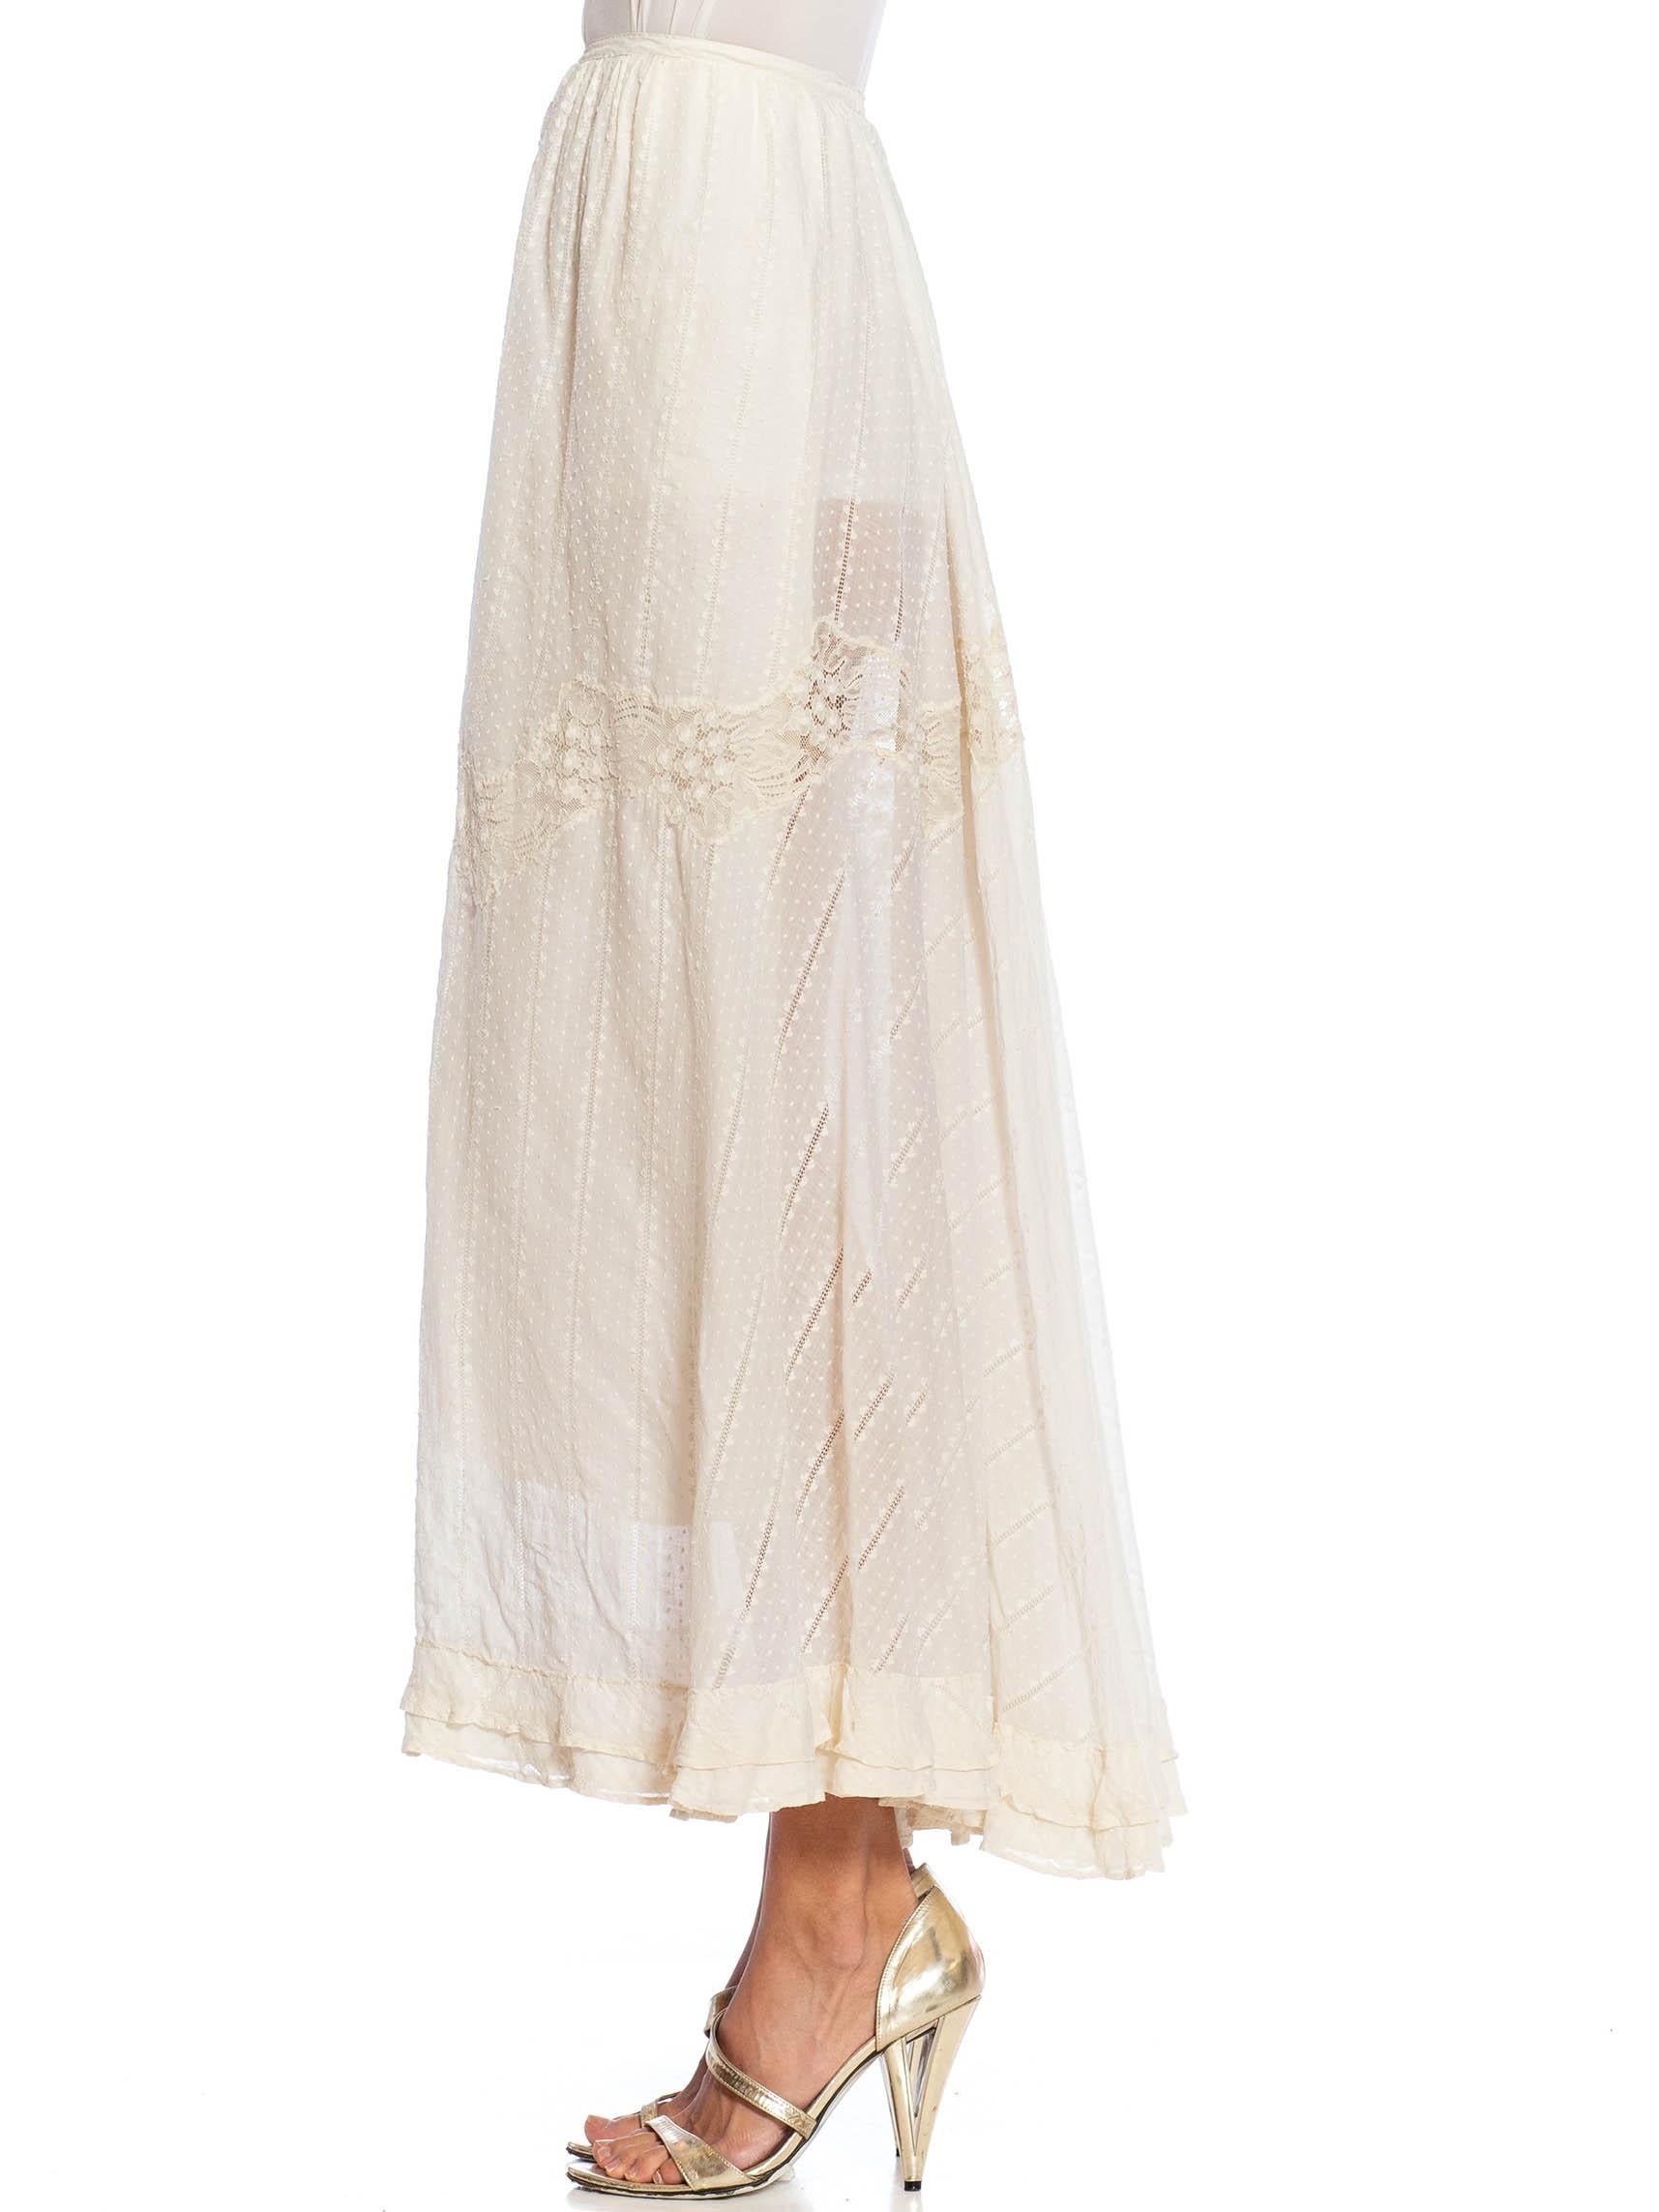 Victorian Ivory Organic Cotton & Lace Trimmed Skirt In Excellent Condition For Sale In New York, NY